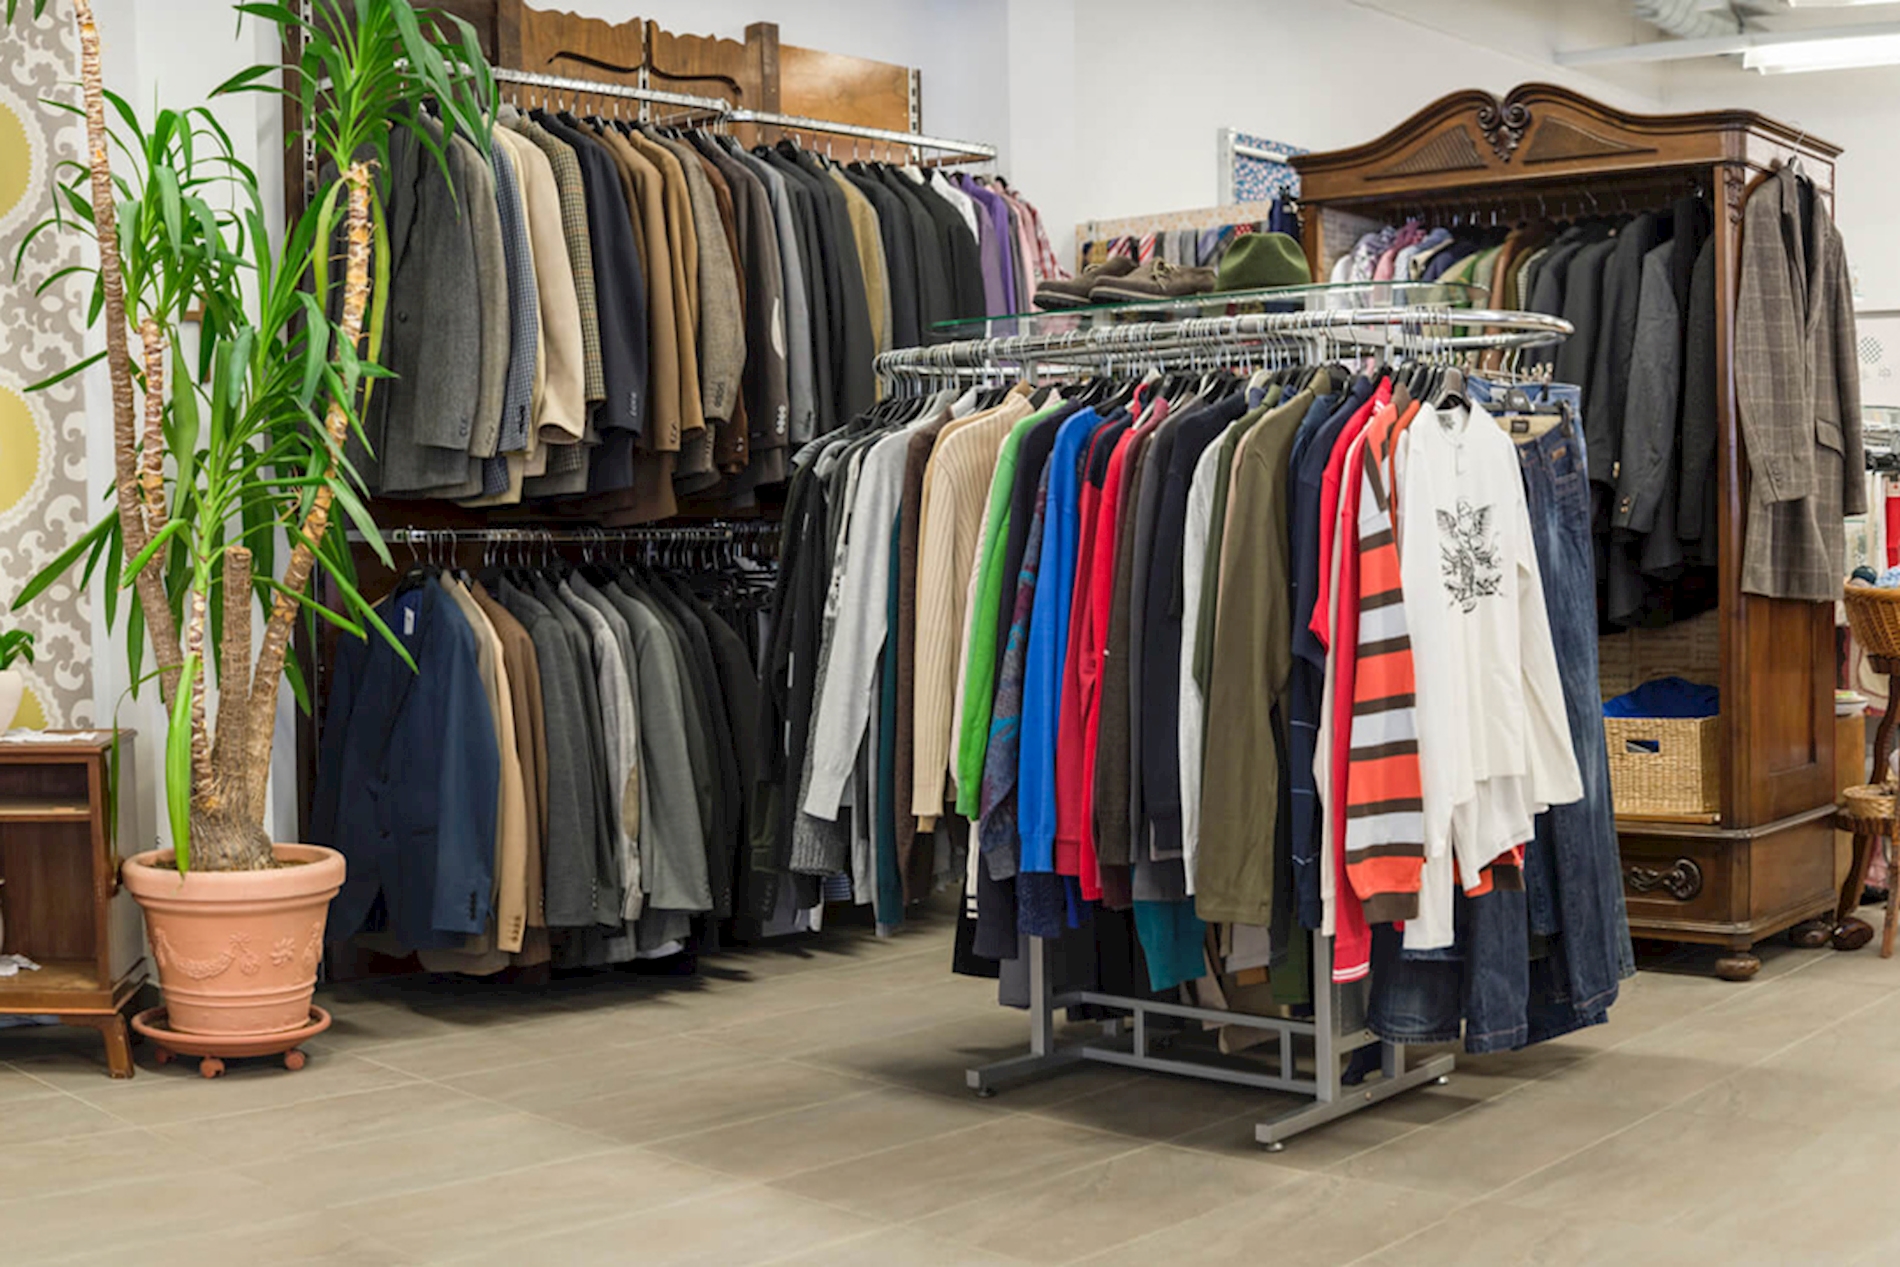 You can see several racks of trendy clothes in the Carla shop in Gleisdorf.